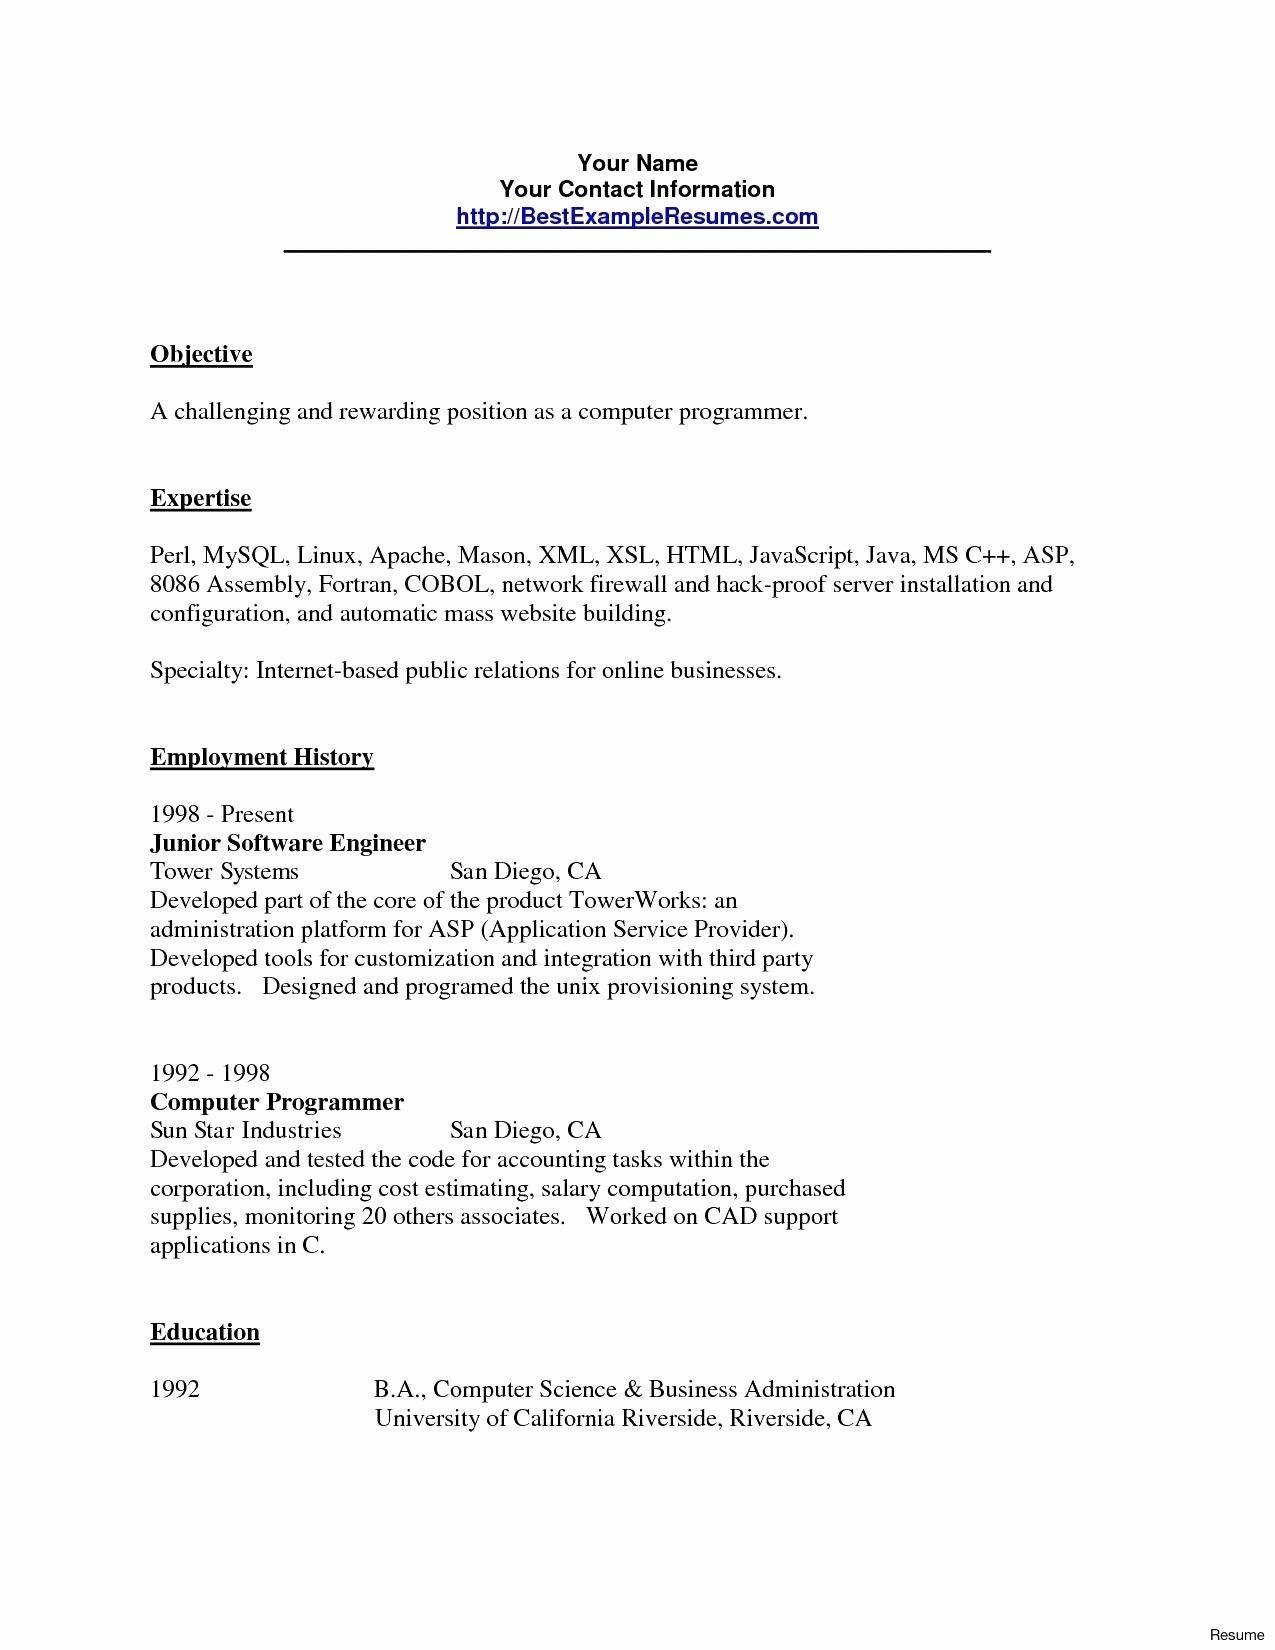 Google Docs Letter Template Awesome Cover Letter Template for Google Docs Examples